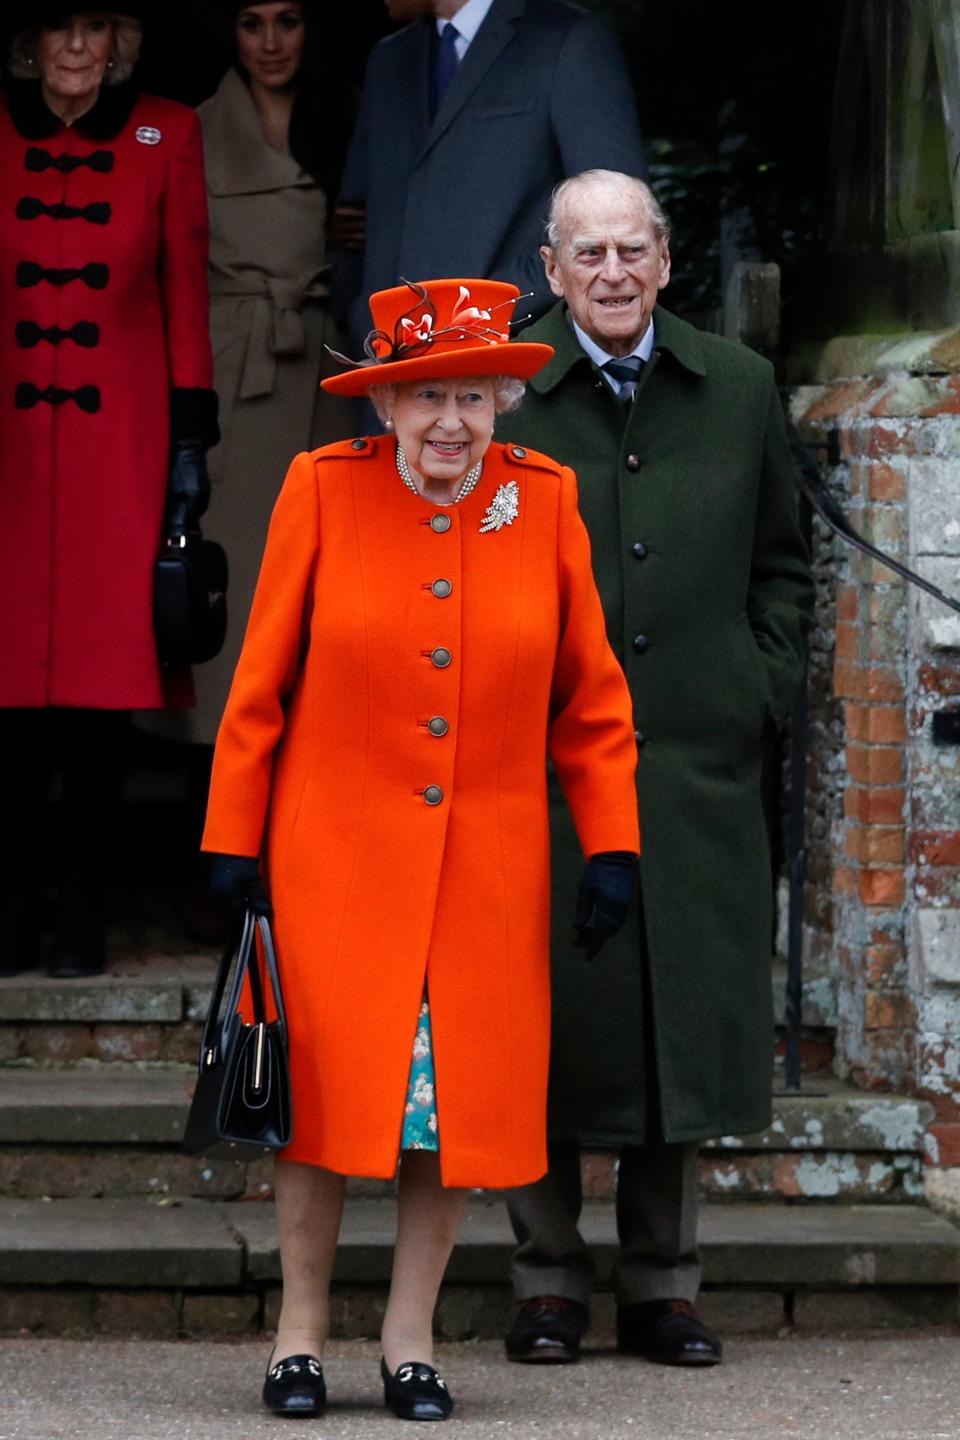 Queen Elizabeth II isn’t afraid of the bright colour – she wore it to the traditional Christmas Day church service<em> (Photo via Getty Images)</em>